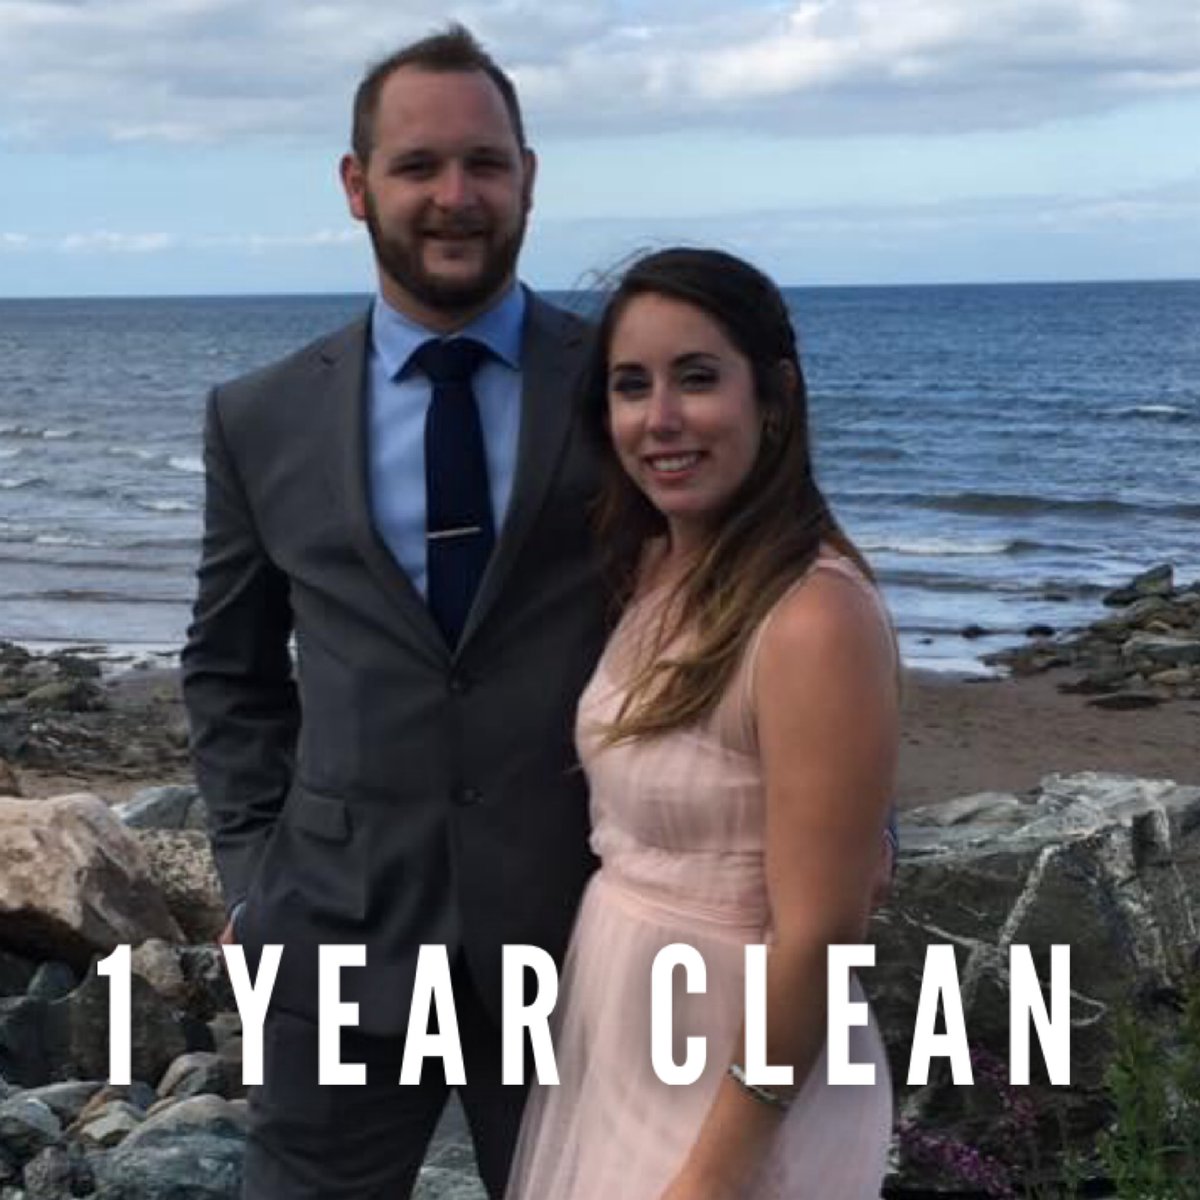 Congratulations James on your ONE YEAR CLEAN ! Recovery is possible. #WeDoRecover #YouCanRecover